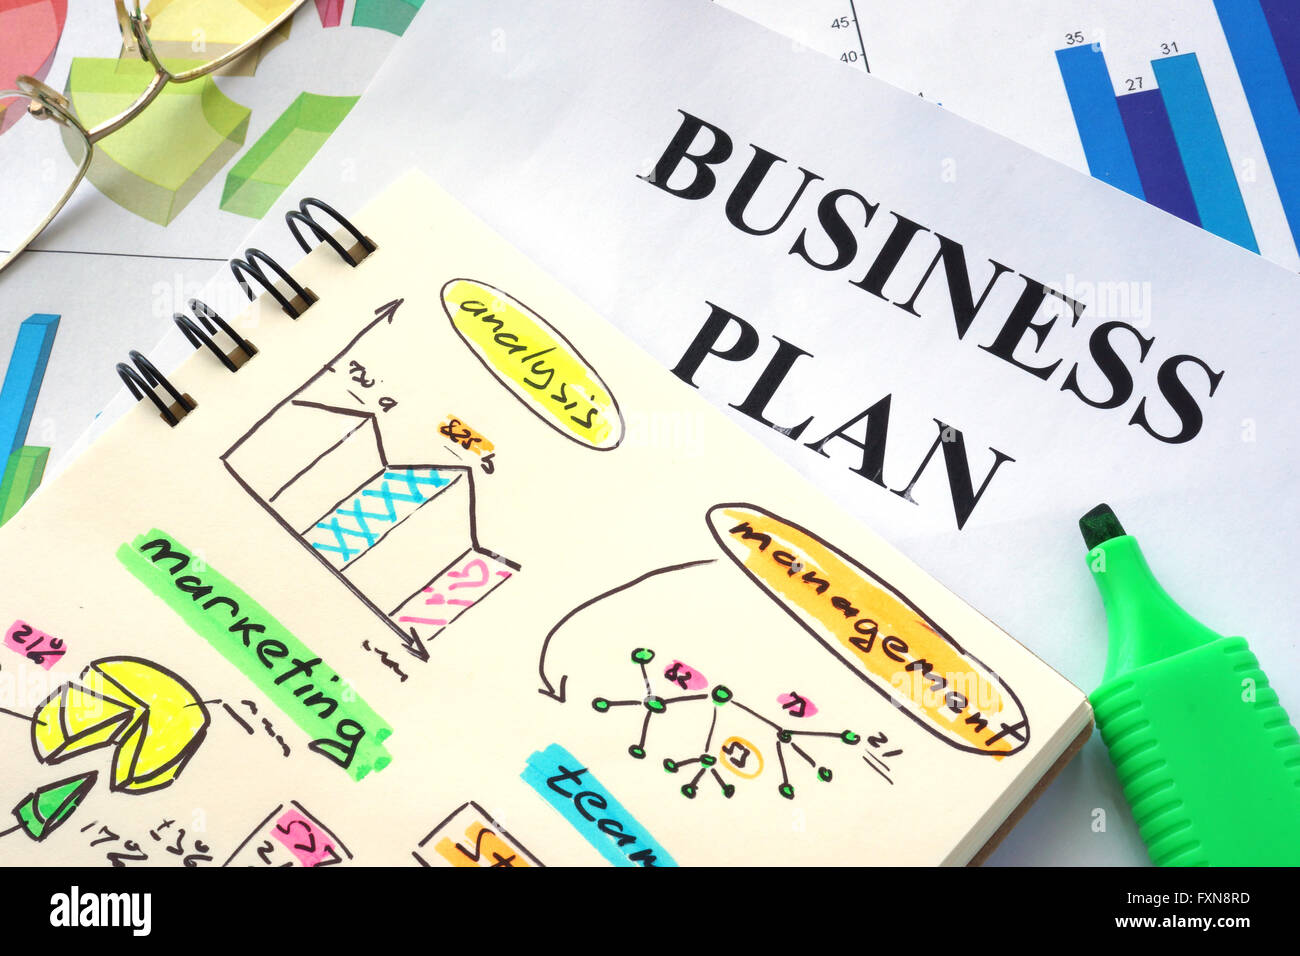 Business plan written in a notebook. Business concept. Stock Photo